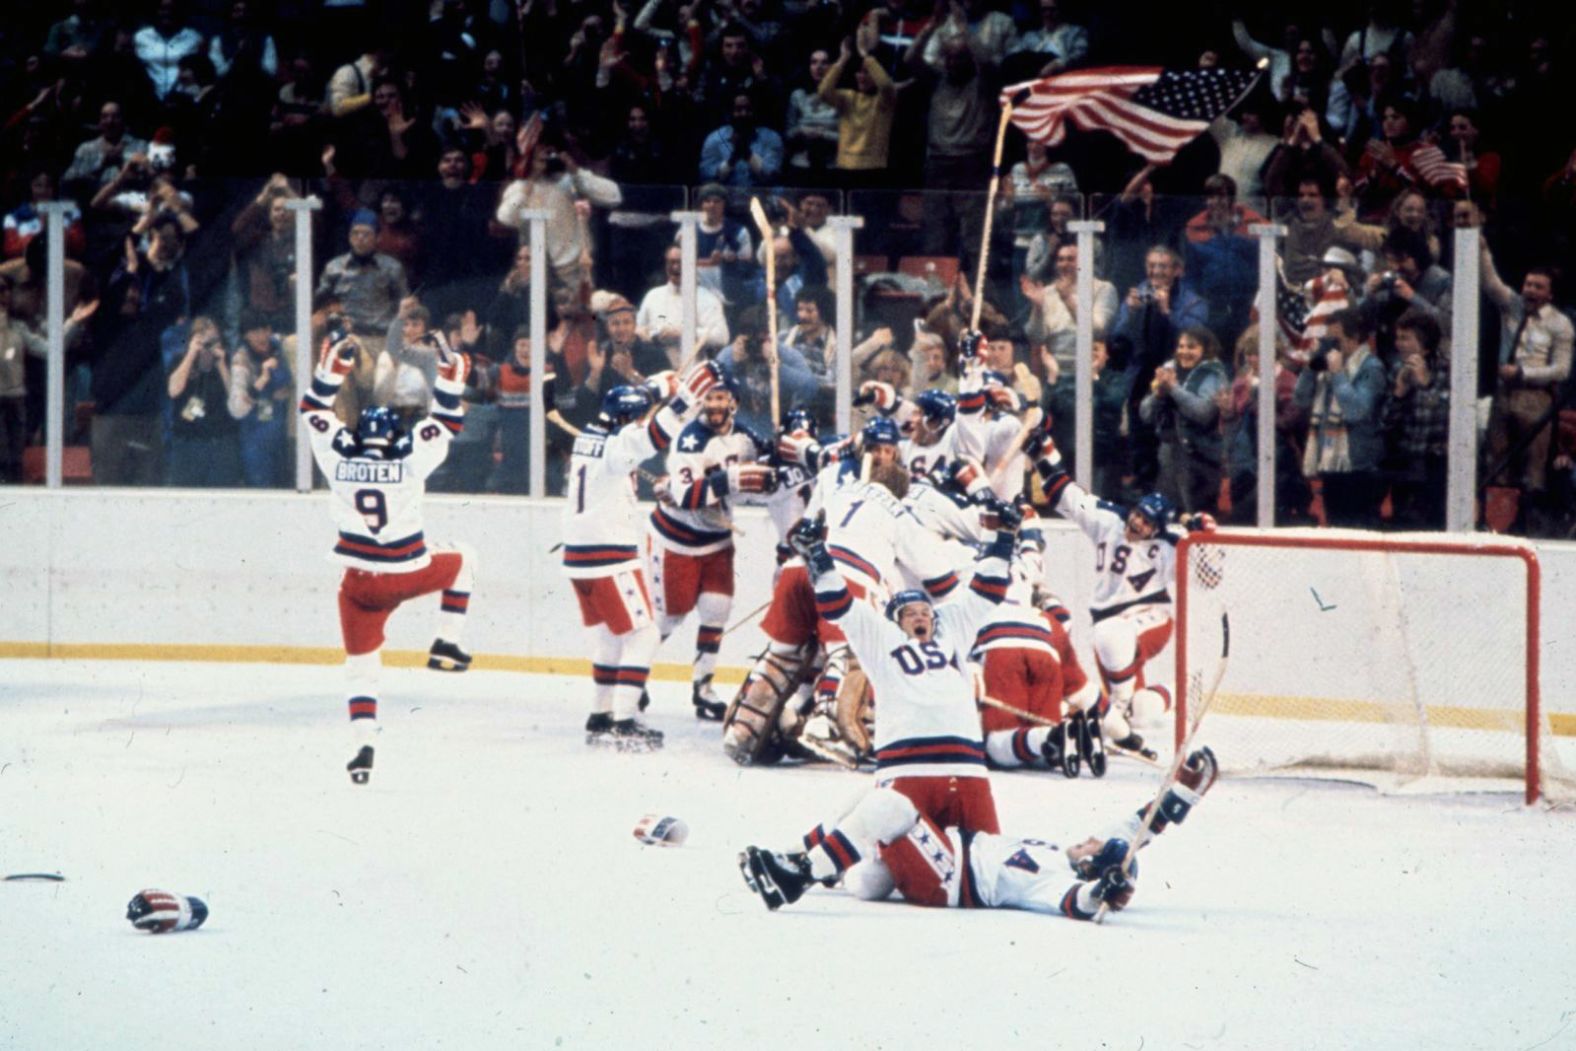 In 1980, a US hockey team made up of college players and amateurs upset the powerhouse Soviet team that was heavily favored to win the country's sixth gold medal in seven Olympics. The Americans' 4-3 win, which came in front of a home crowd in Lake Placid, New York, was dubbed the "Miracle on Ice," and Sports Illustrated later recognized it as the No. 1 sports moment of the 20th century. The Americans went on to defeat Finland two days later to win the gold medal.